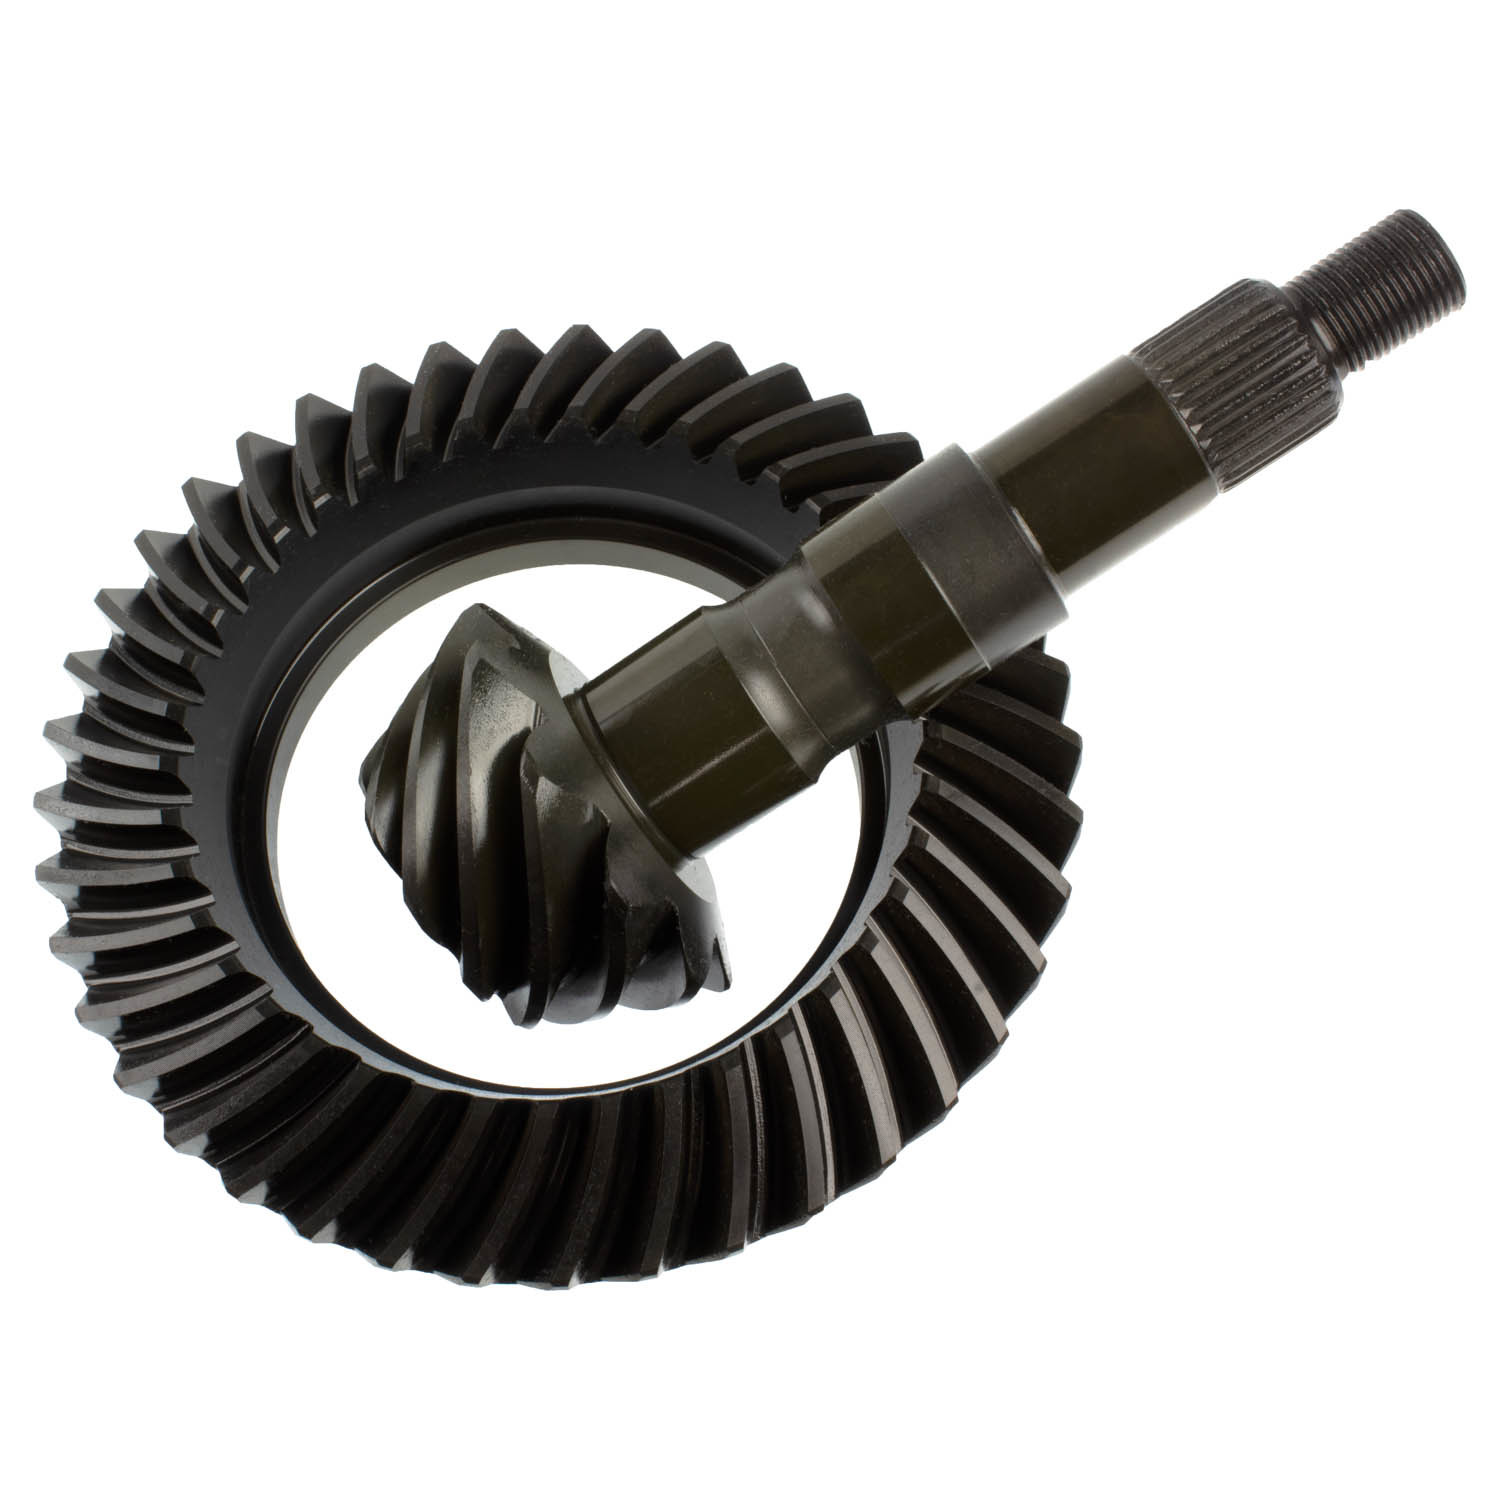 Richmond Gear GM85410 - Ring and Pinion, Excel, 4.10 Ratio, 30 Spline Pinion, 3 Series, 8.5 in / 8.6 in, GM 10-Bolt, Kit